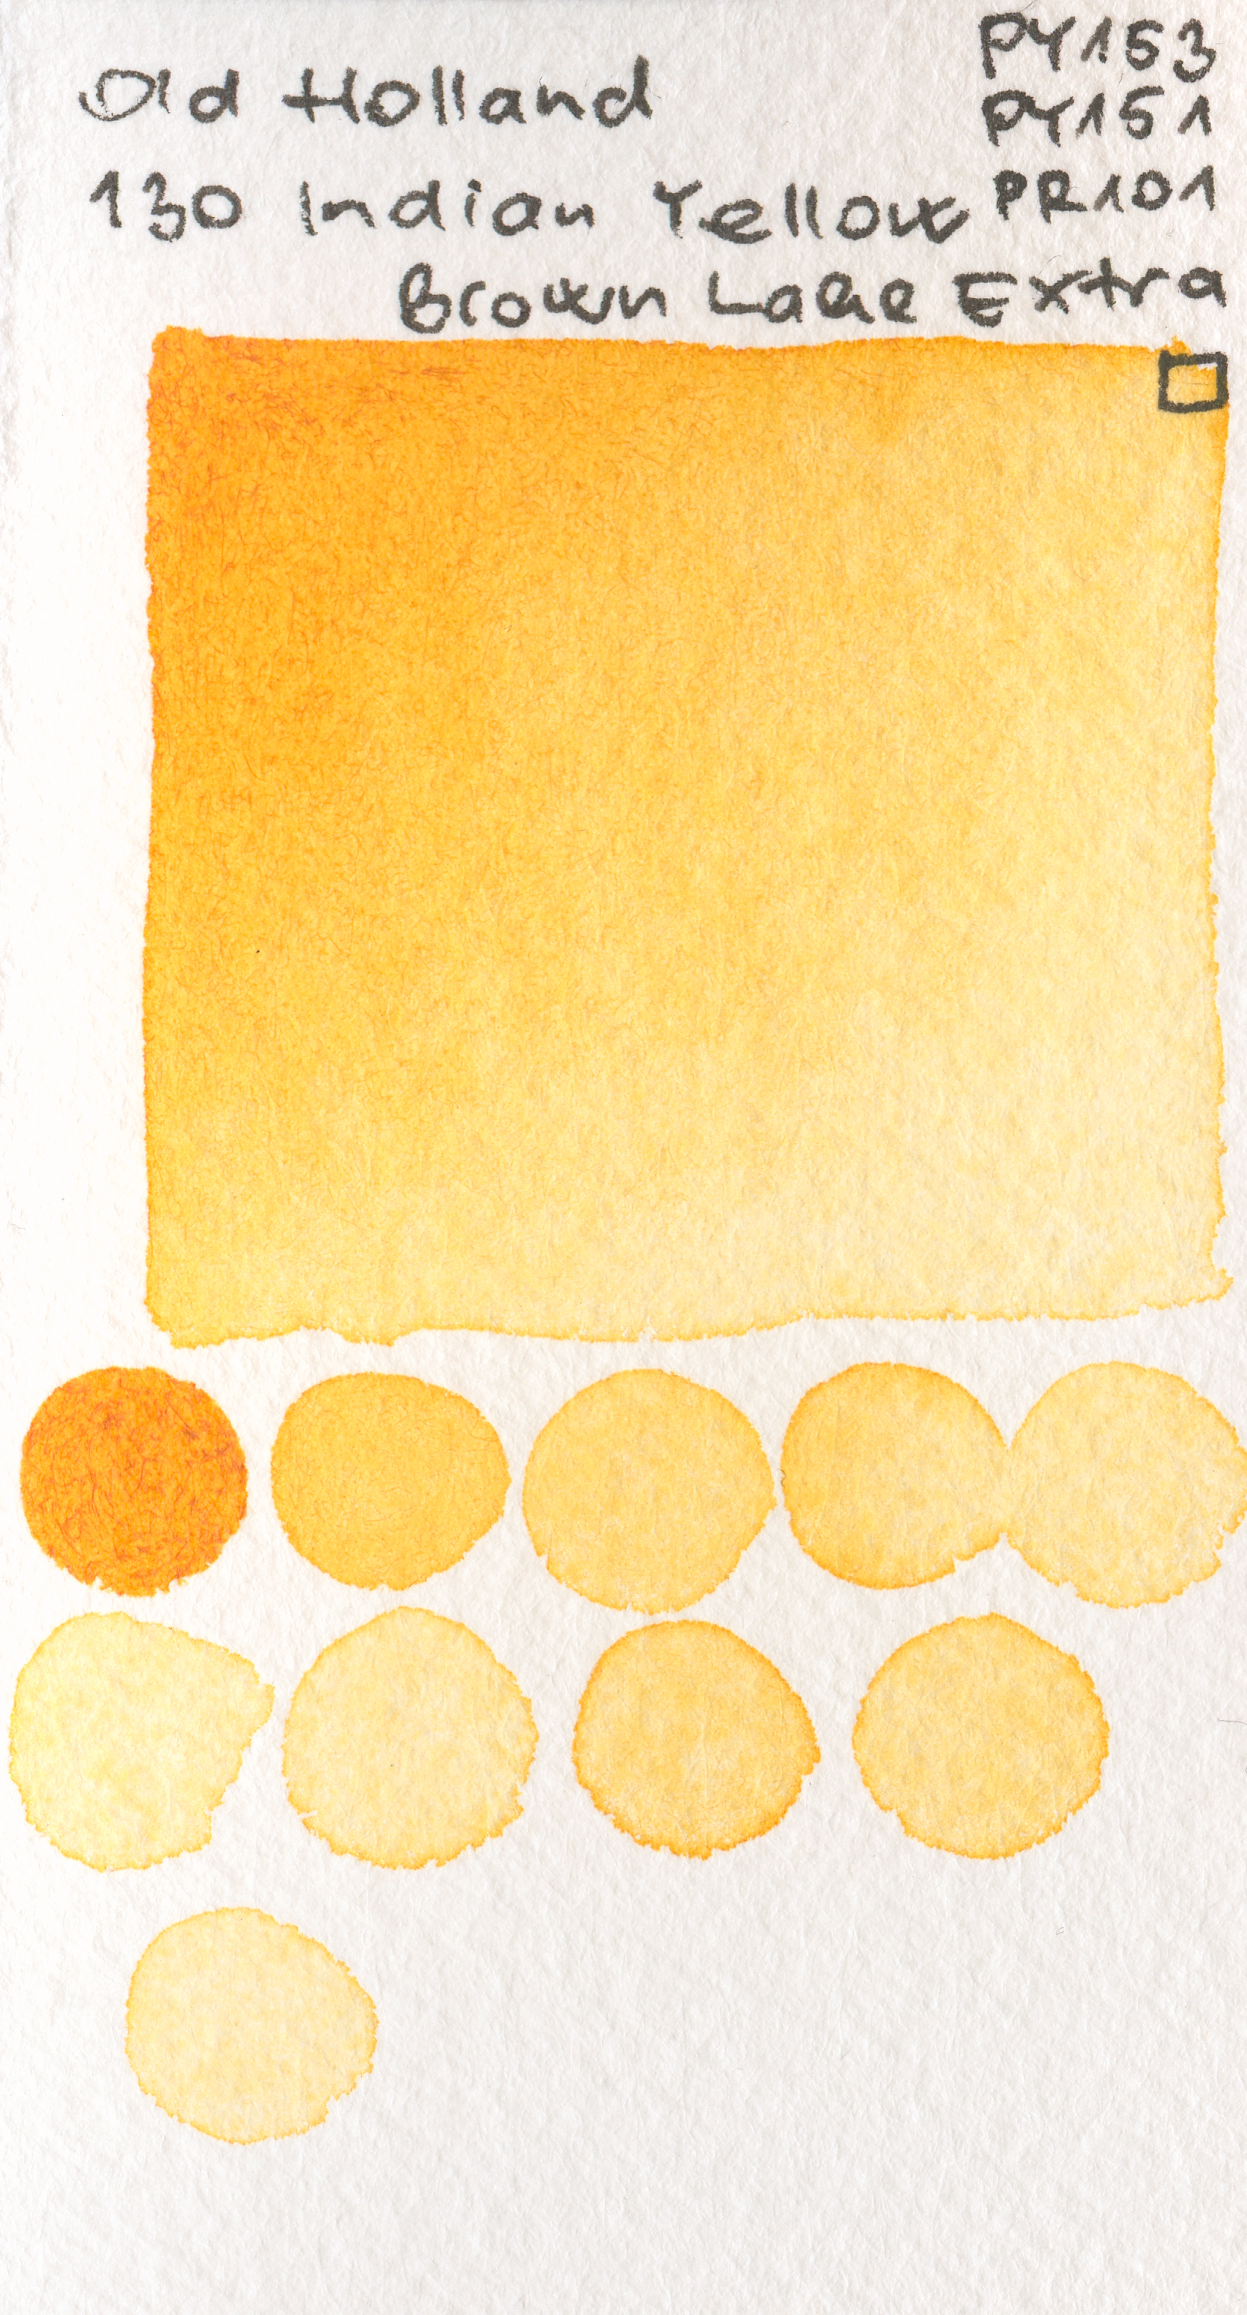 Old Holland Classic Watercolours 130 Indian Yellow Brown Lake Extra PY153, PY151, PR101 watercolor swatch